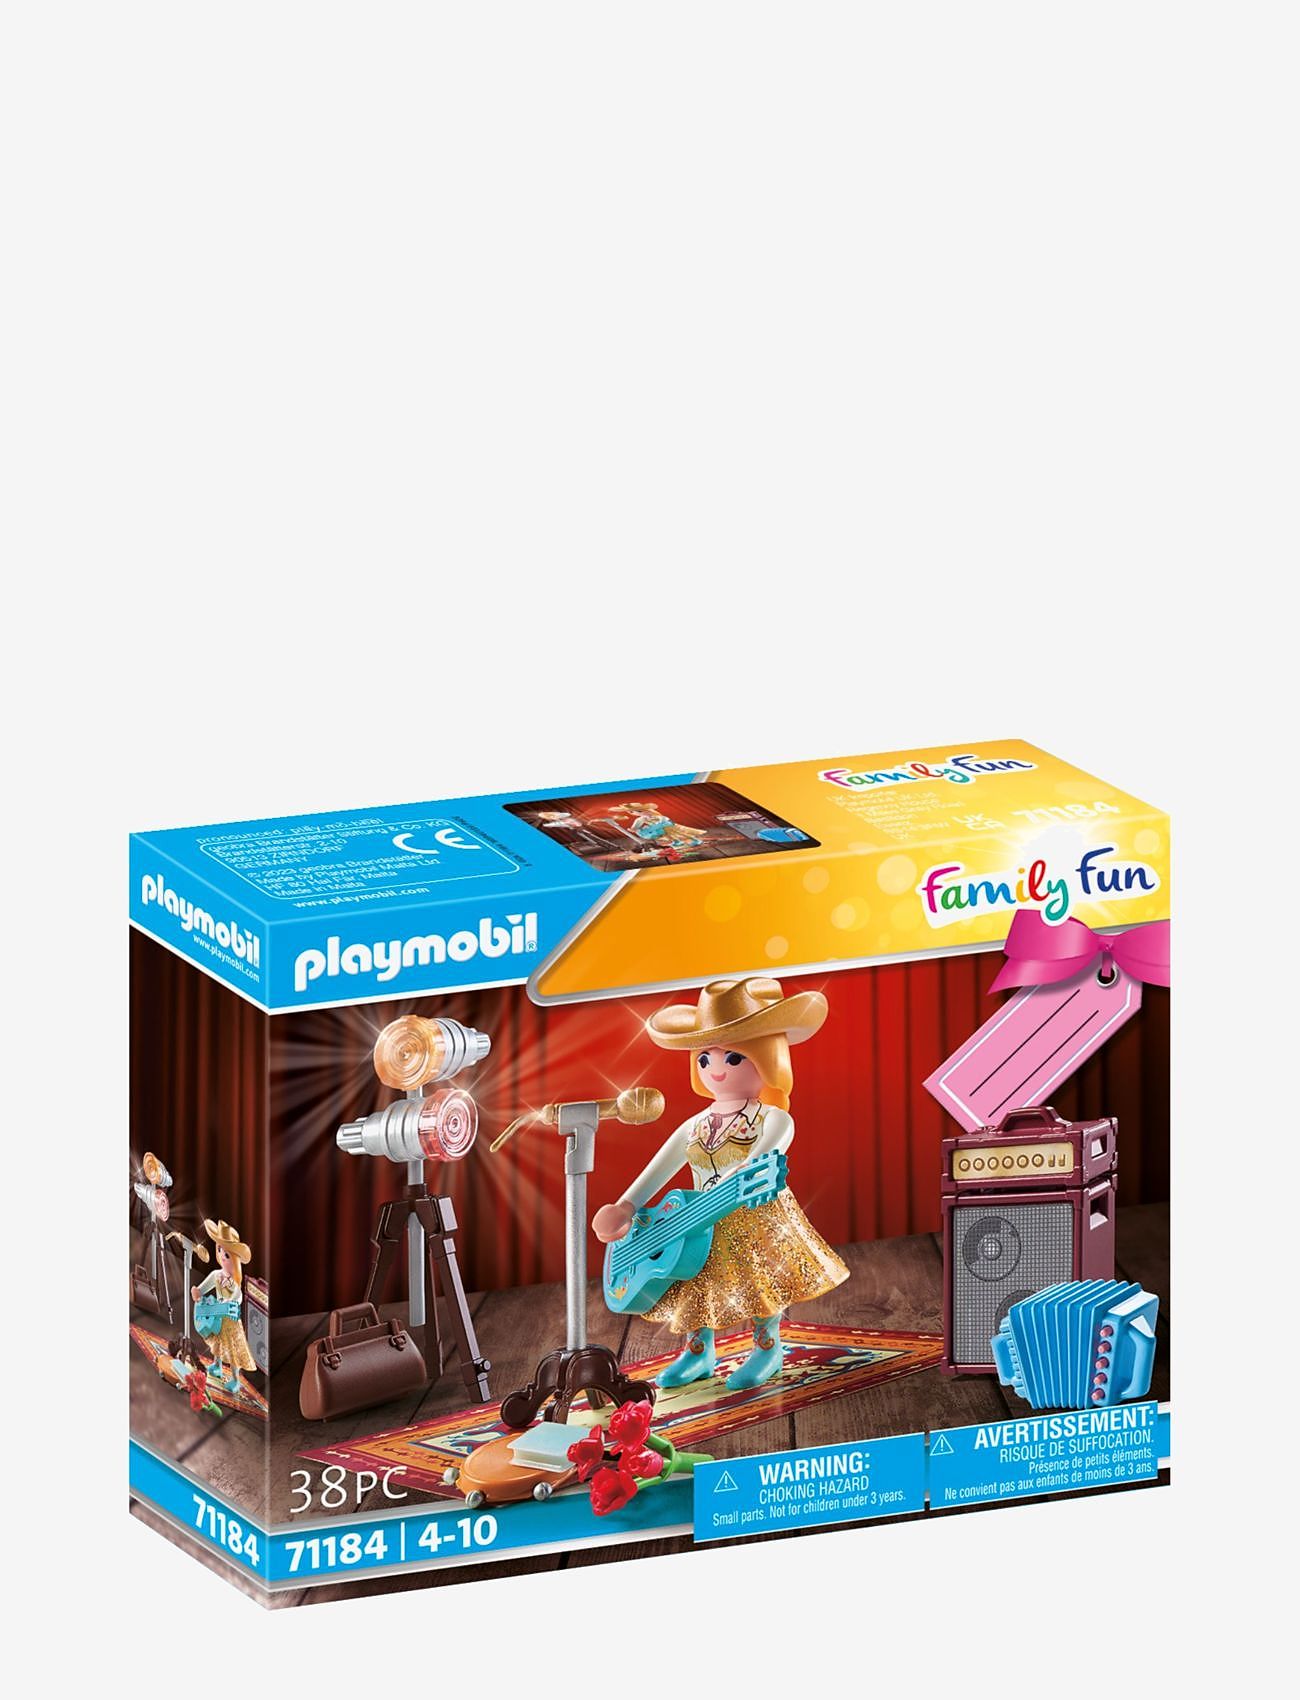 PLAYMOBIL - PLAYMOBIL Gift Sets Country Singer Gift Set - 71184 - playmobil family fun - multicolored - 0